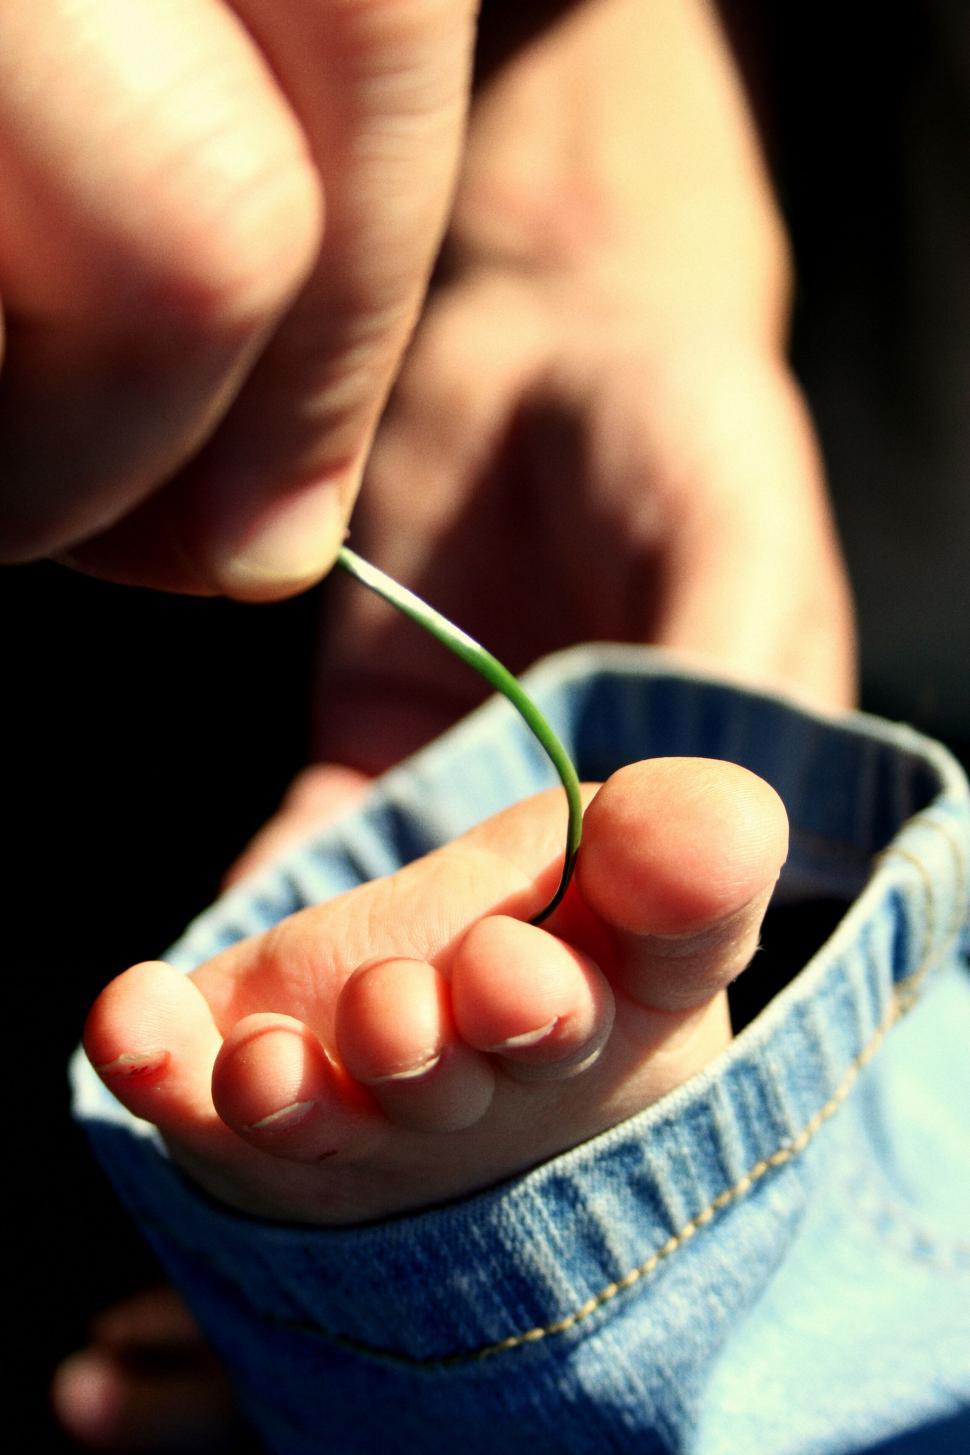 Free Image of Blade of Grass Balanced on Finger 